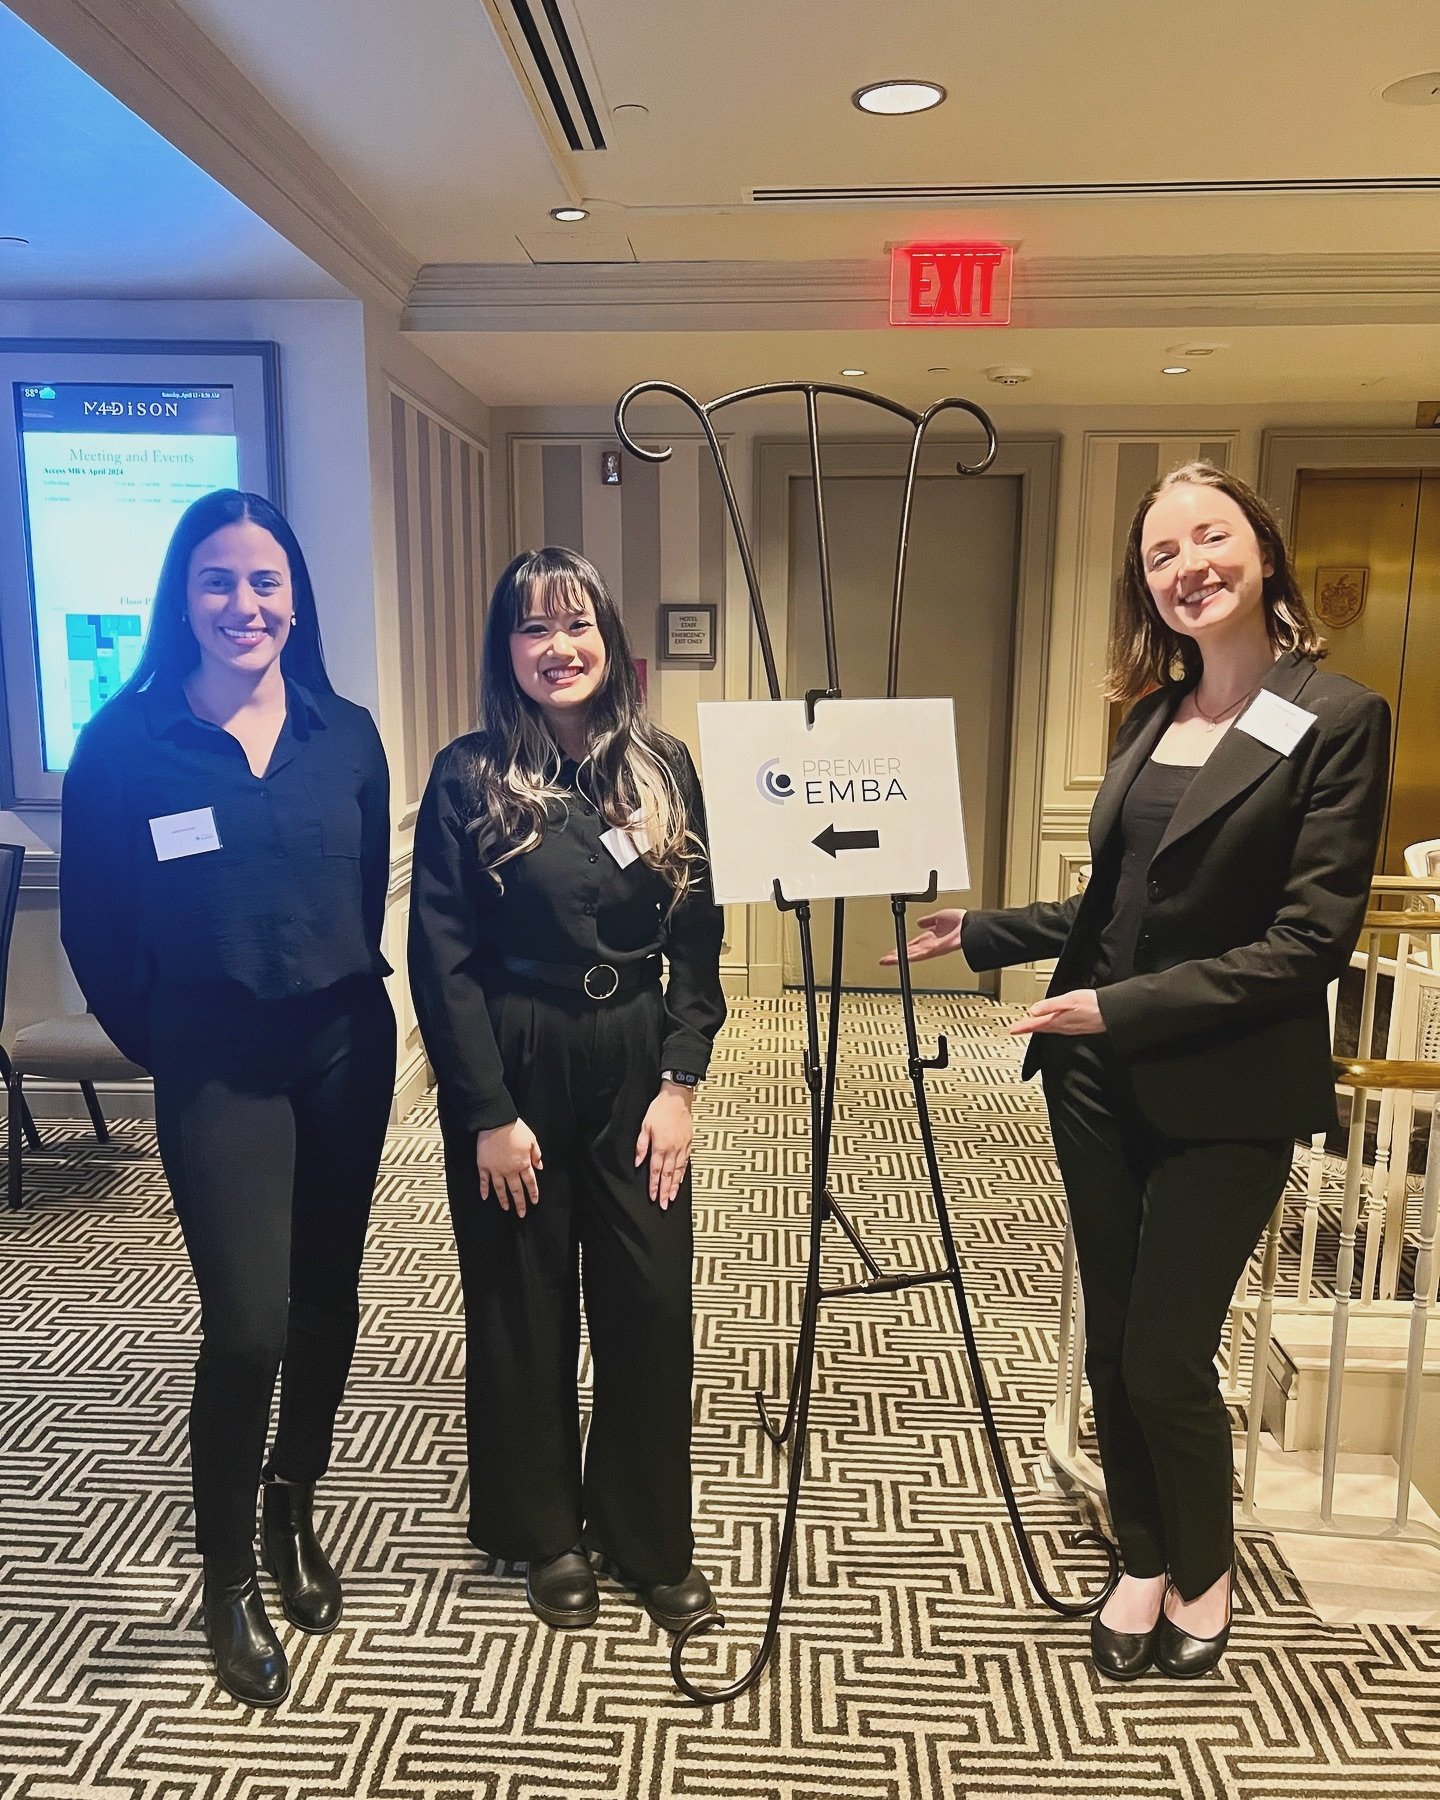 Behind every successful event is a remarkable team!
Cheers to our awesome hostesses for a seamless Premier EMBA event in DC!
📍Washington, DC
.
.
#TeamWorkMakesTheDreamWork #PremierEMBA #WashingtonDC #BlossomTalent